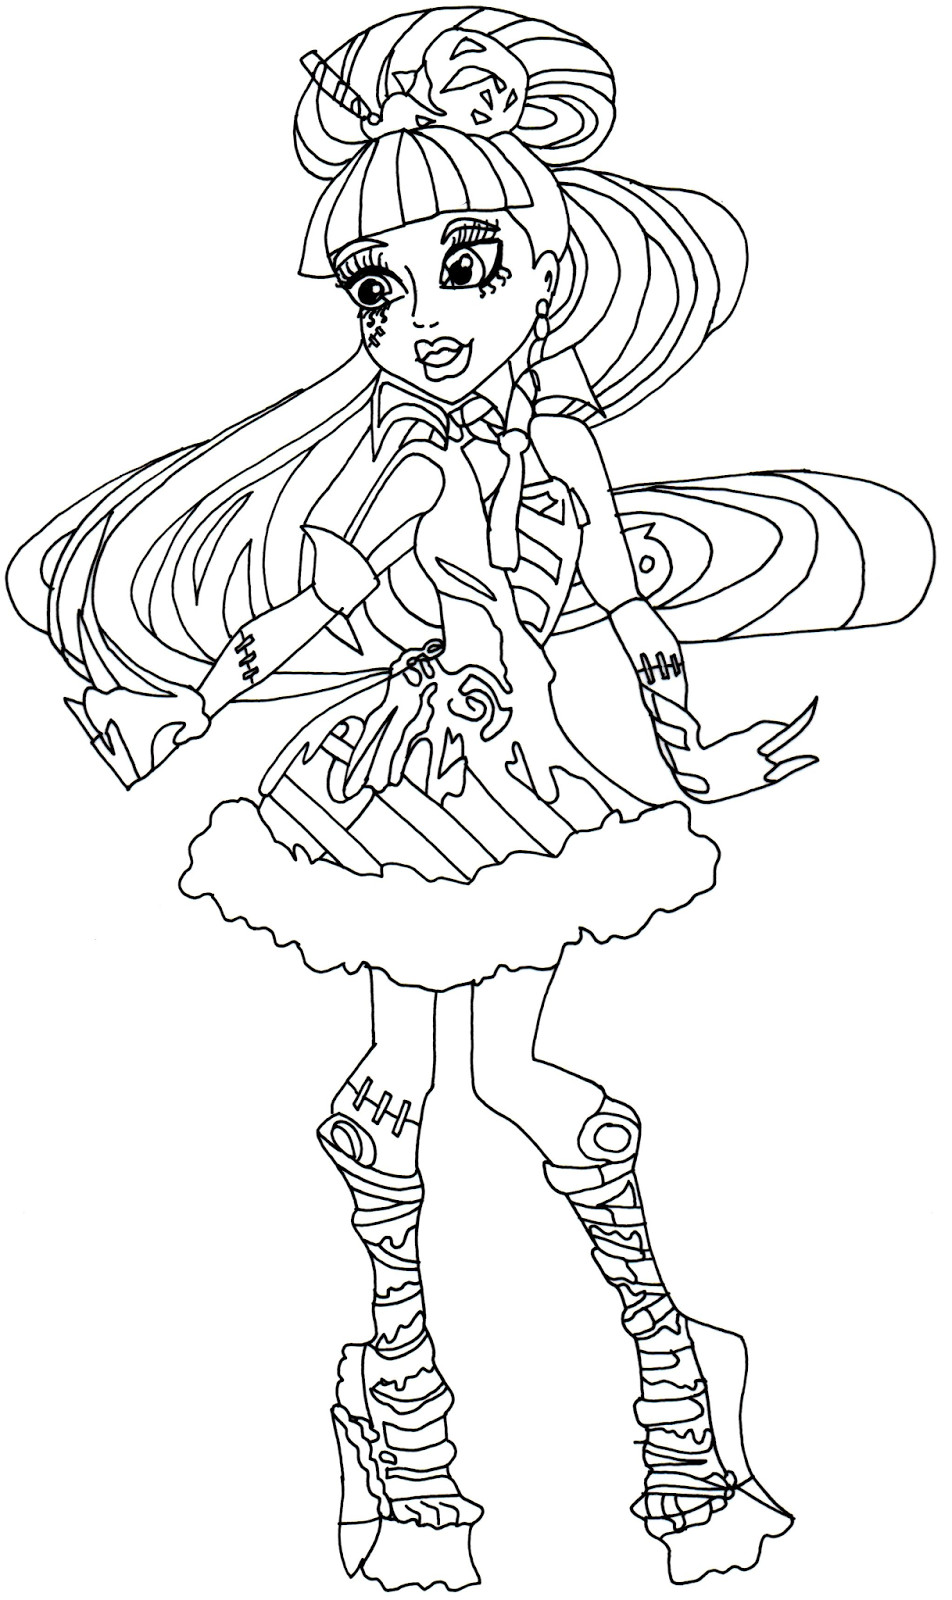 Cool Coloring Sheets For Girls Free
 Monster High Coloring Pages